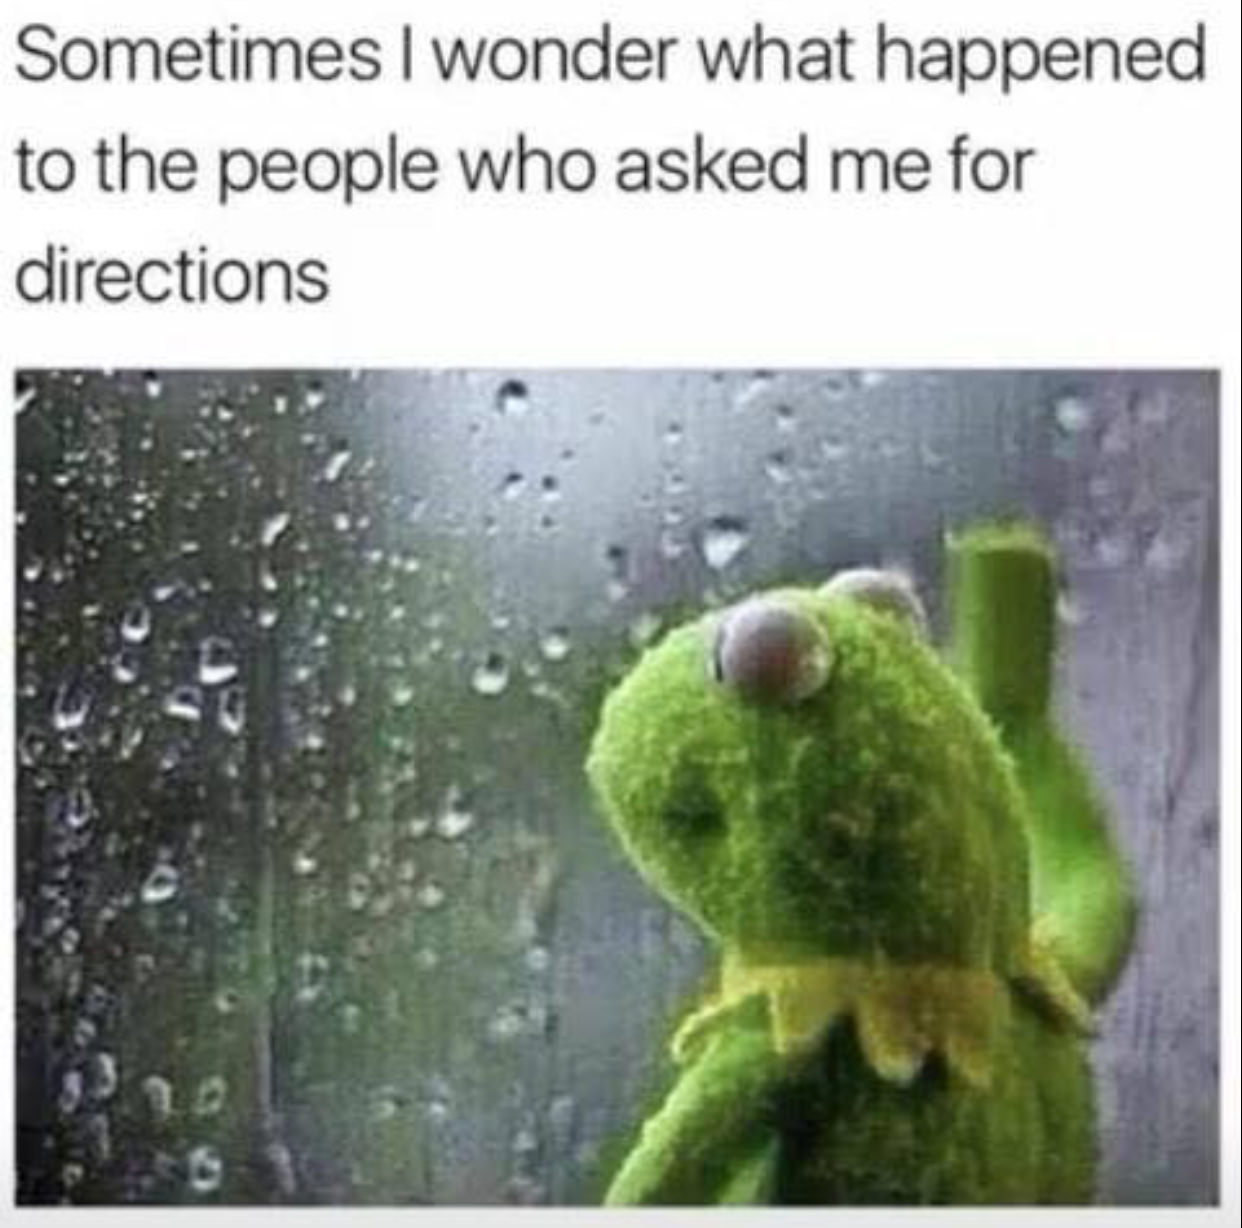 sometimes i wonder meme - Sometimes I wonder what happened to the people who asked me for directions